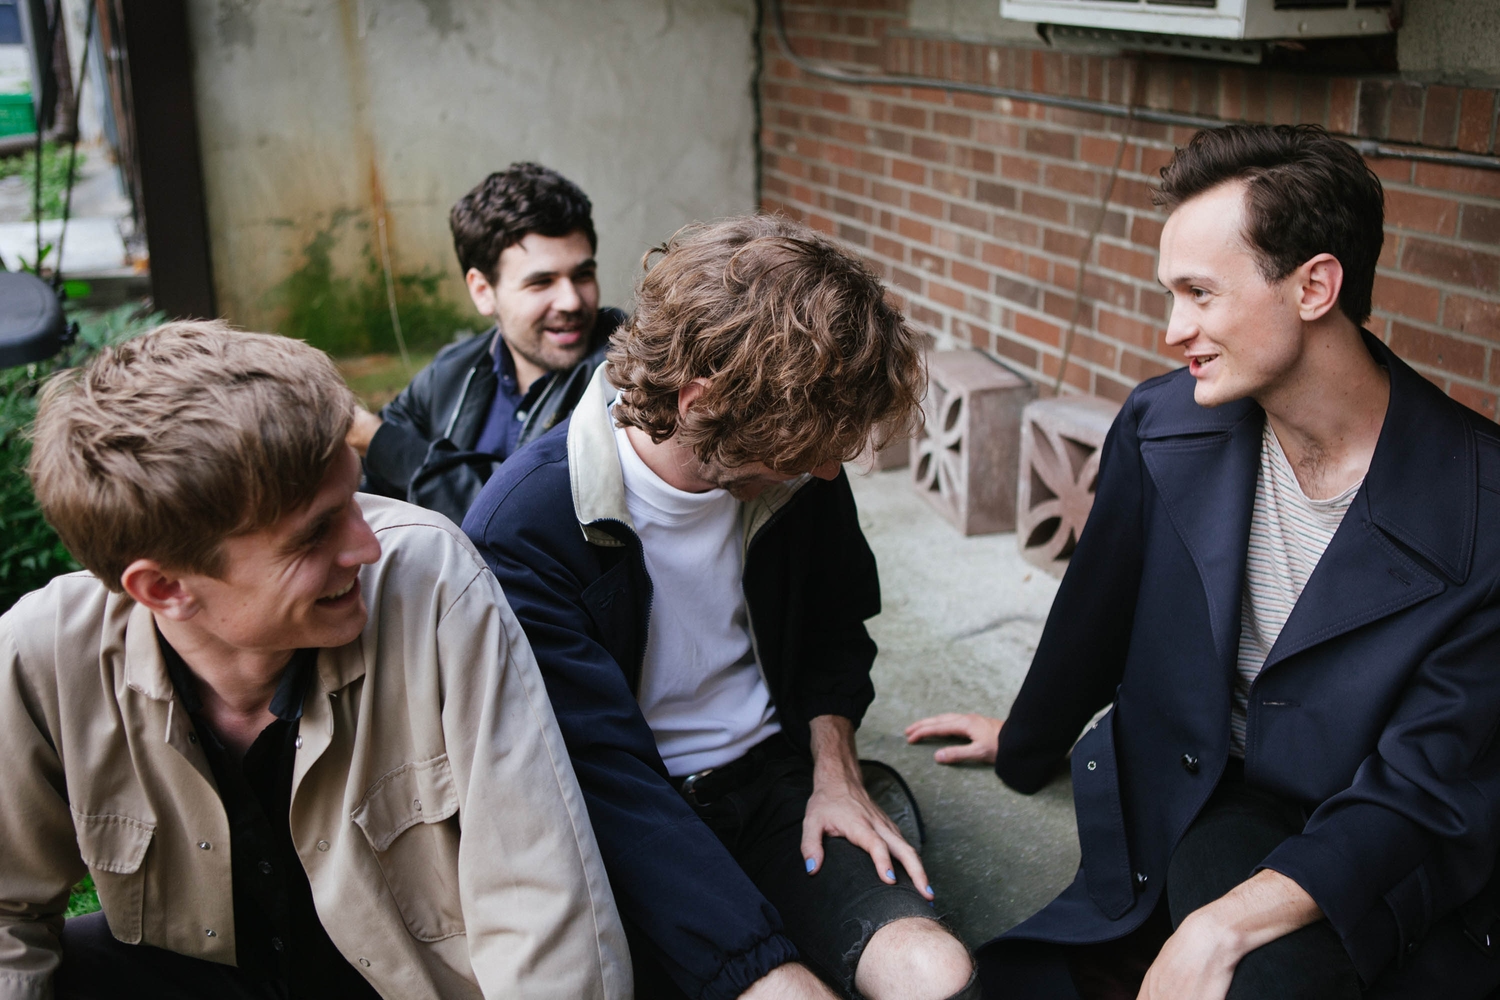 Ought share new track ‘Desire’